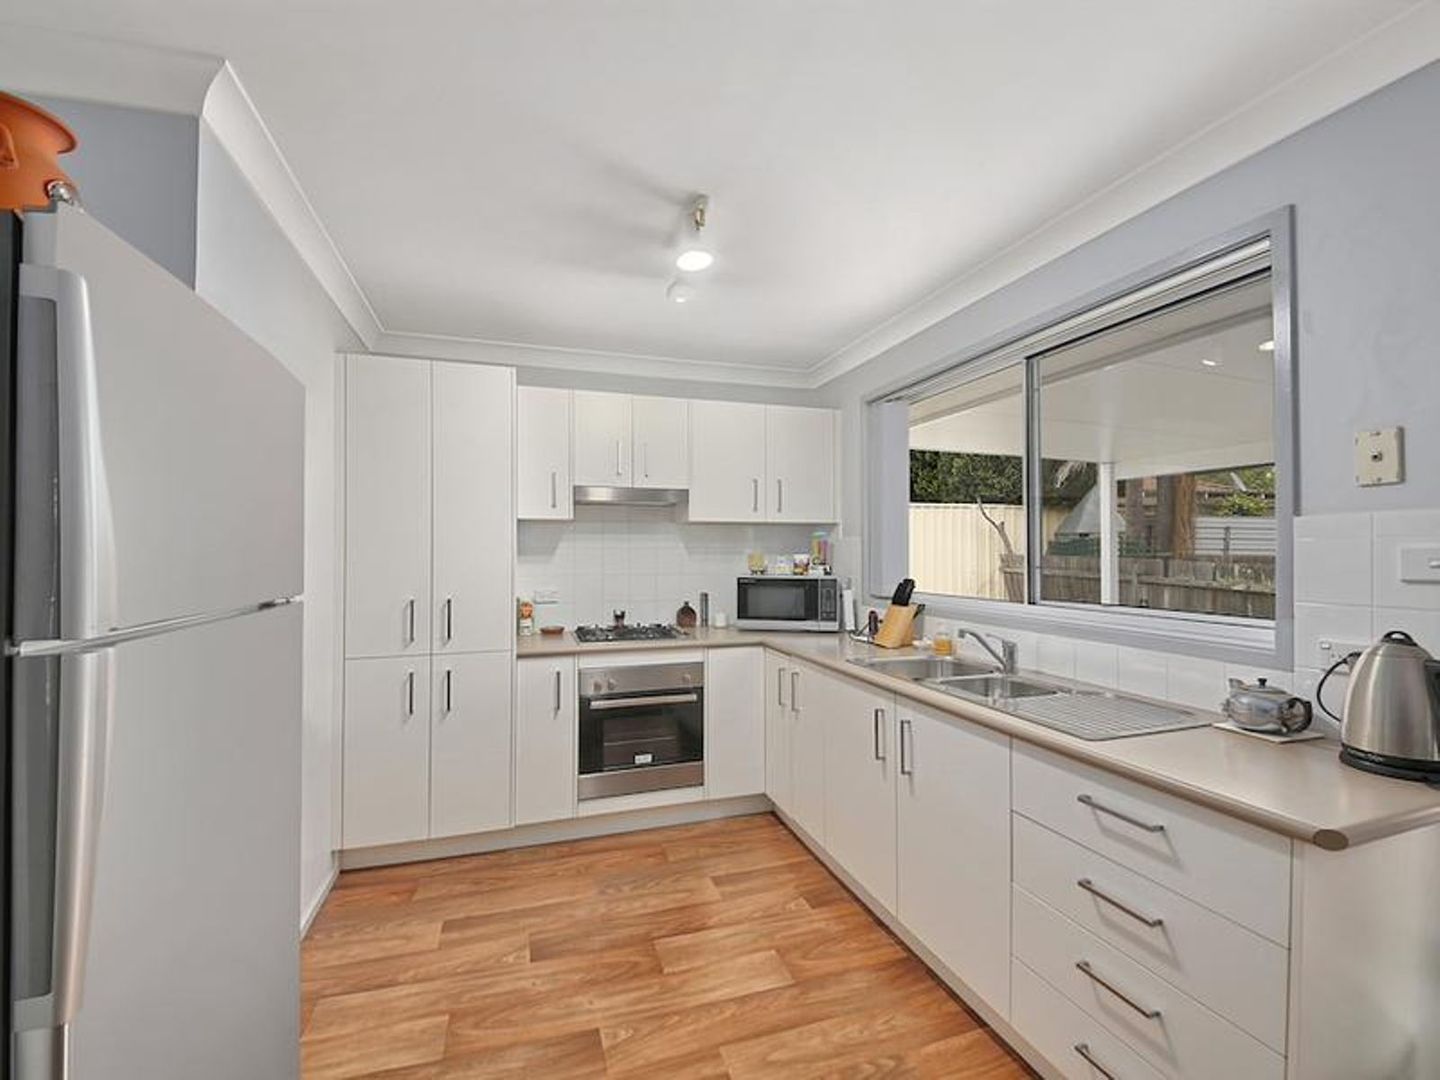 61 Carbasse Crescent, St Helens Park NSW 2560, Image 1